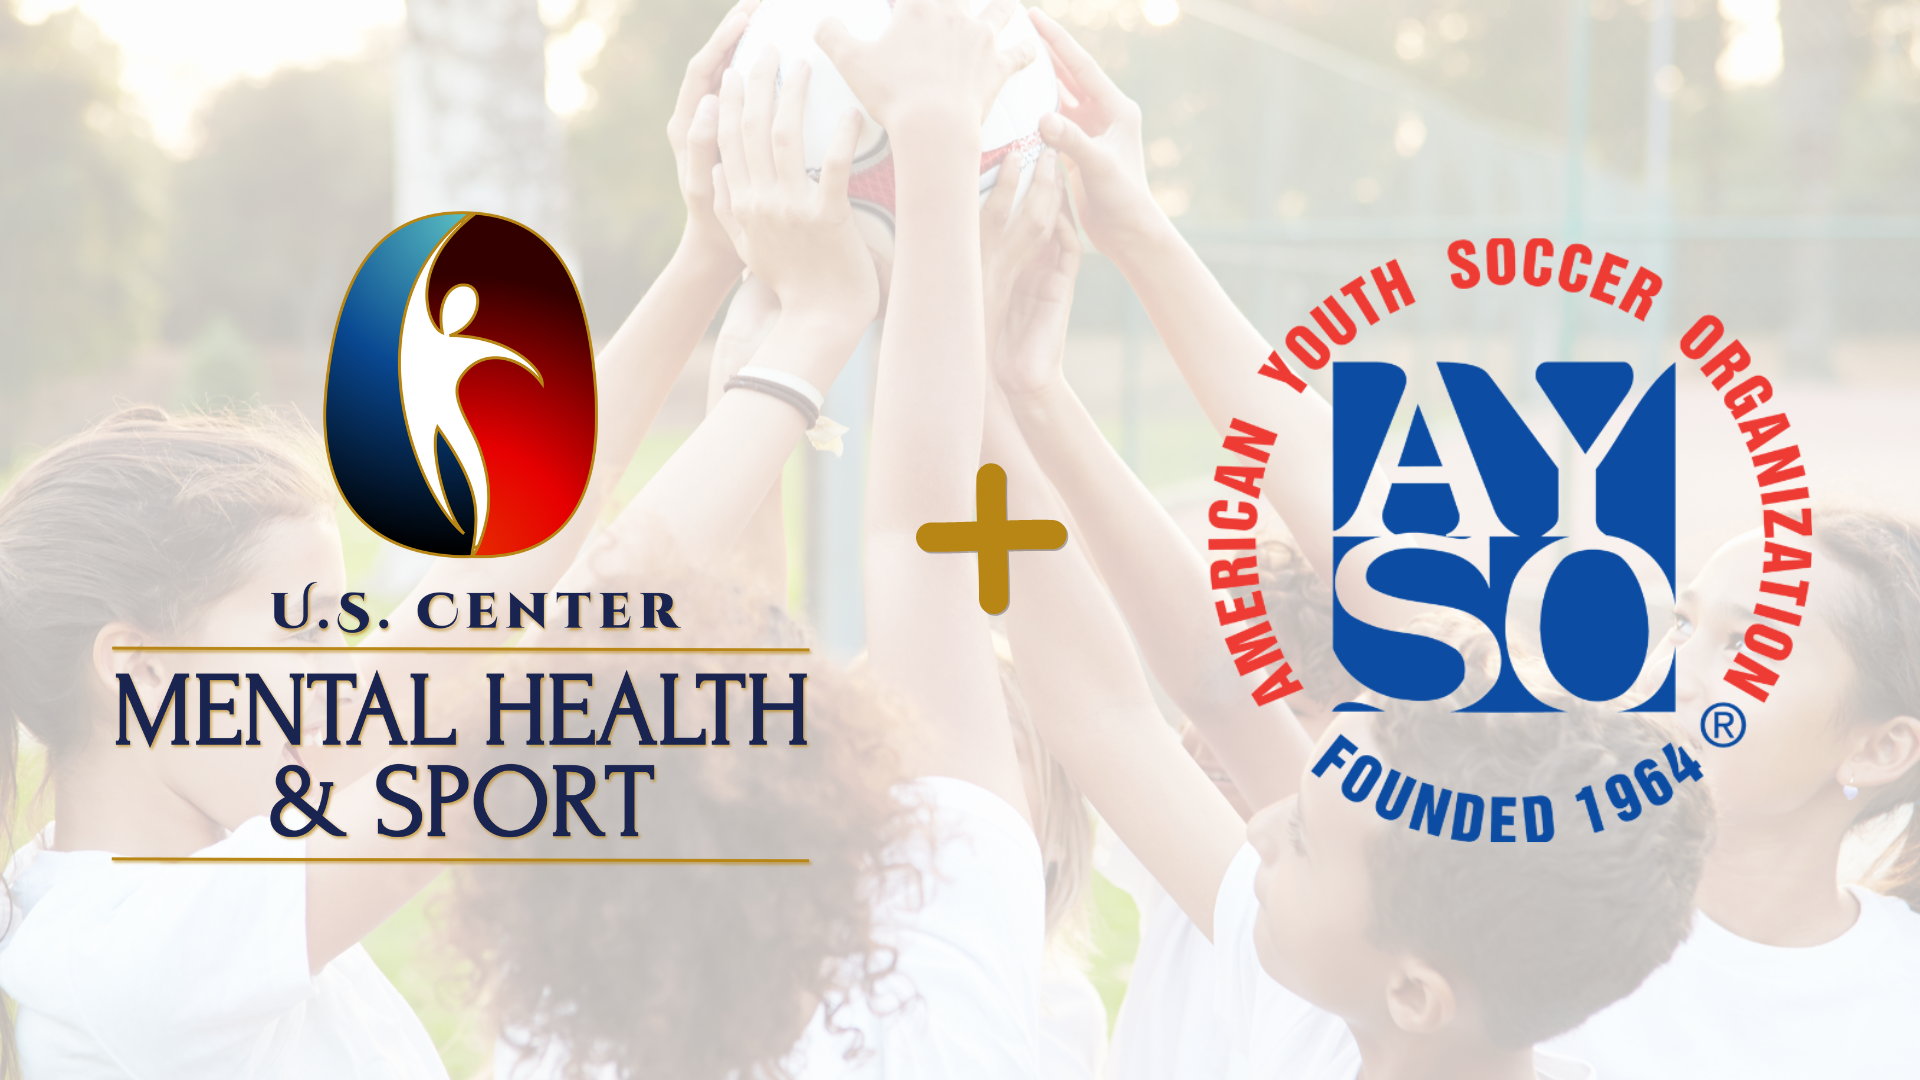 U.S. Center for Mental Health & Sport and AYSO